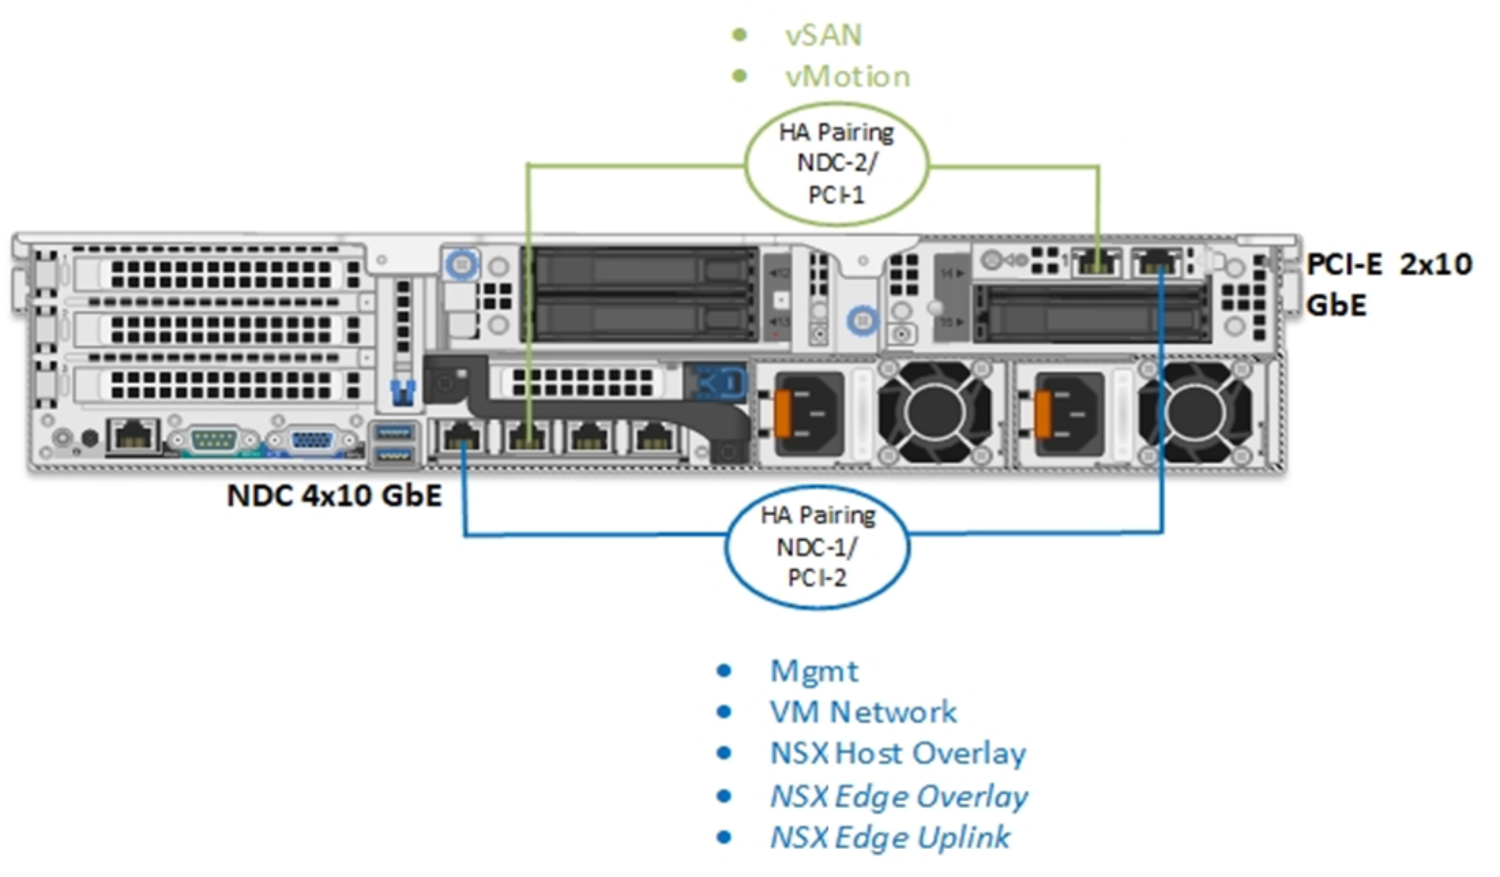 This figure shows a single vDS - 4x10 profile from the Physical Network Connectivity options table